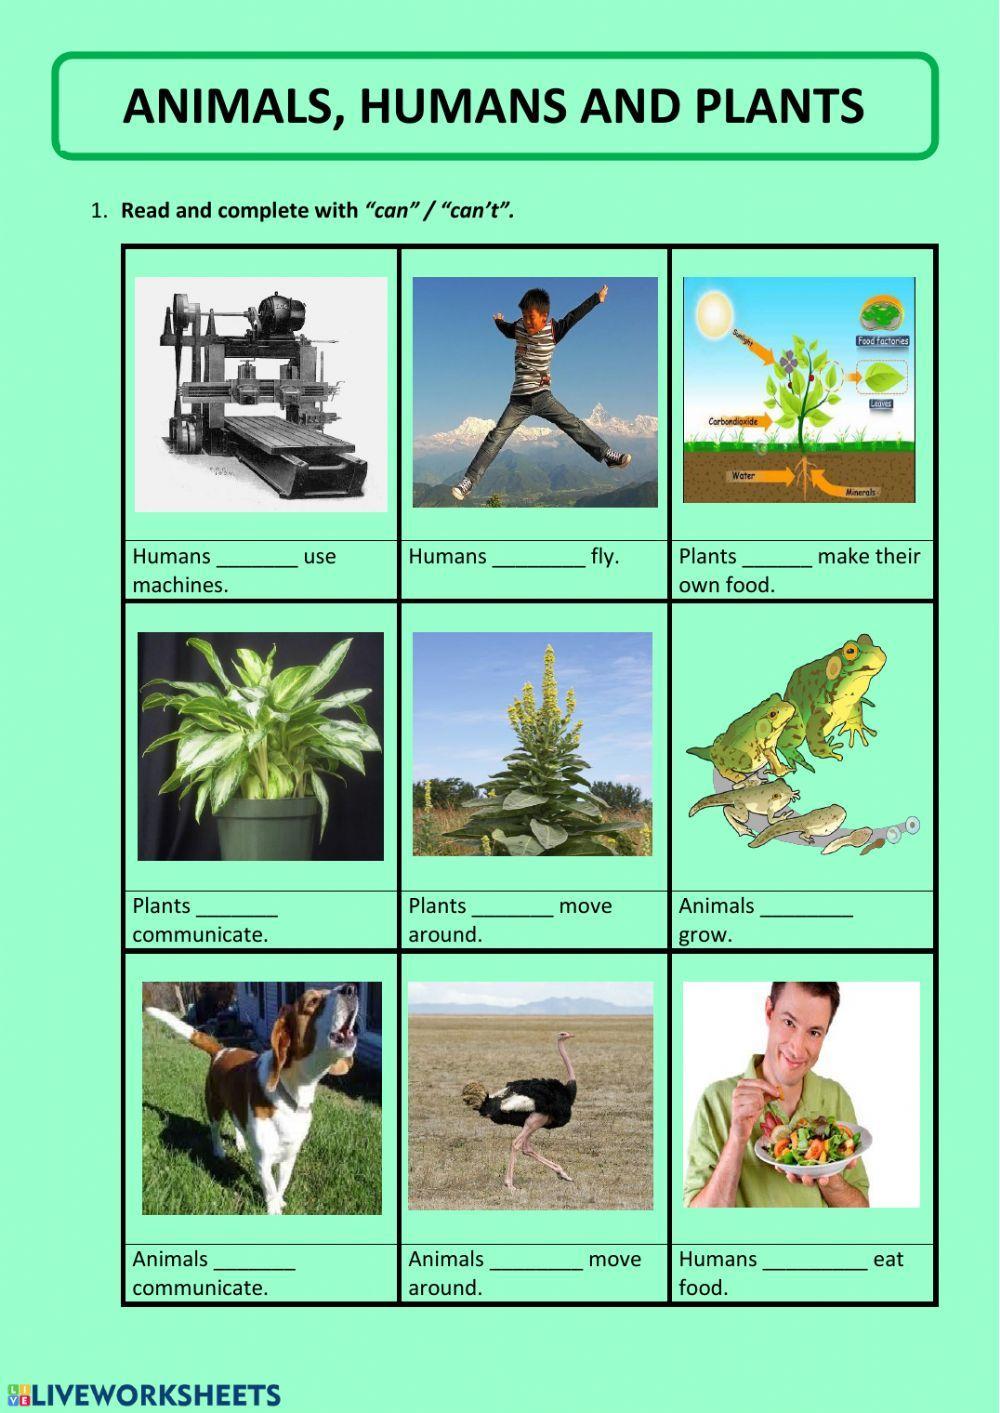 Animals, humans and plants